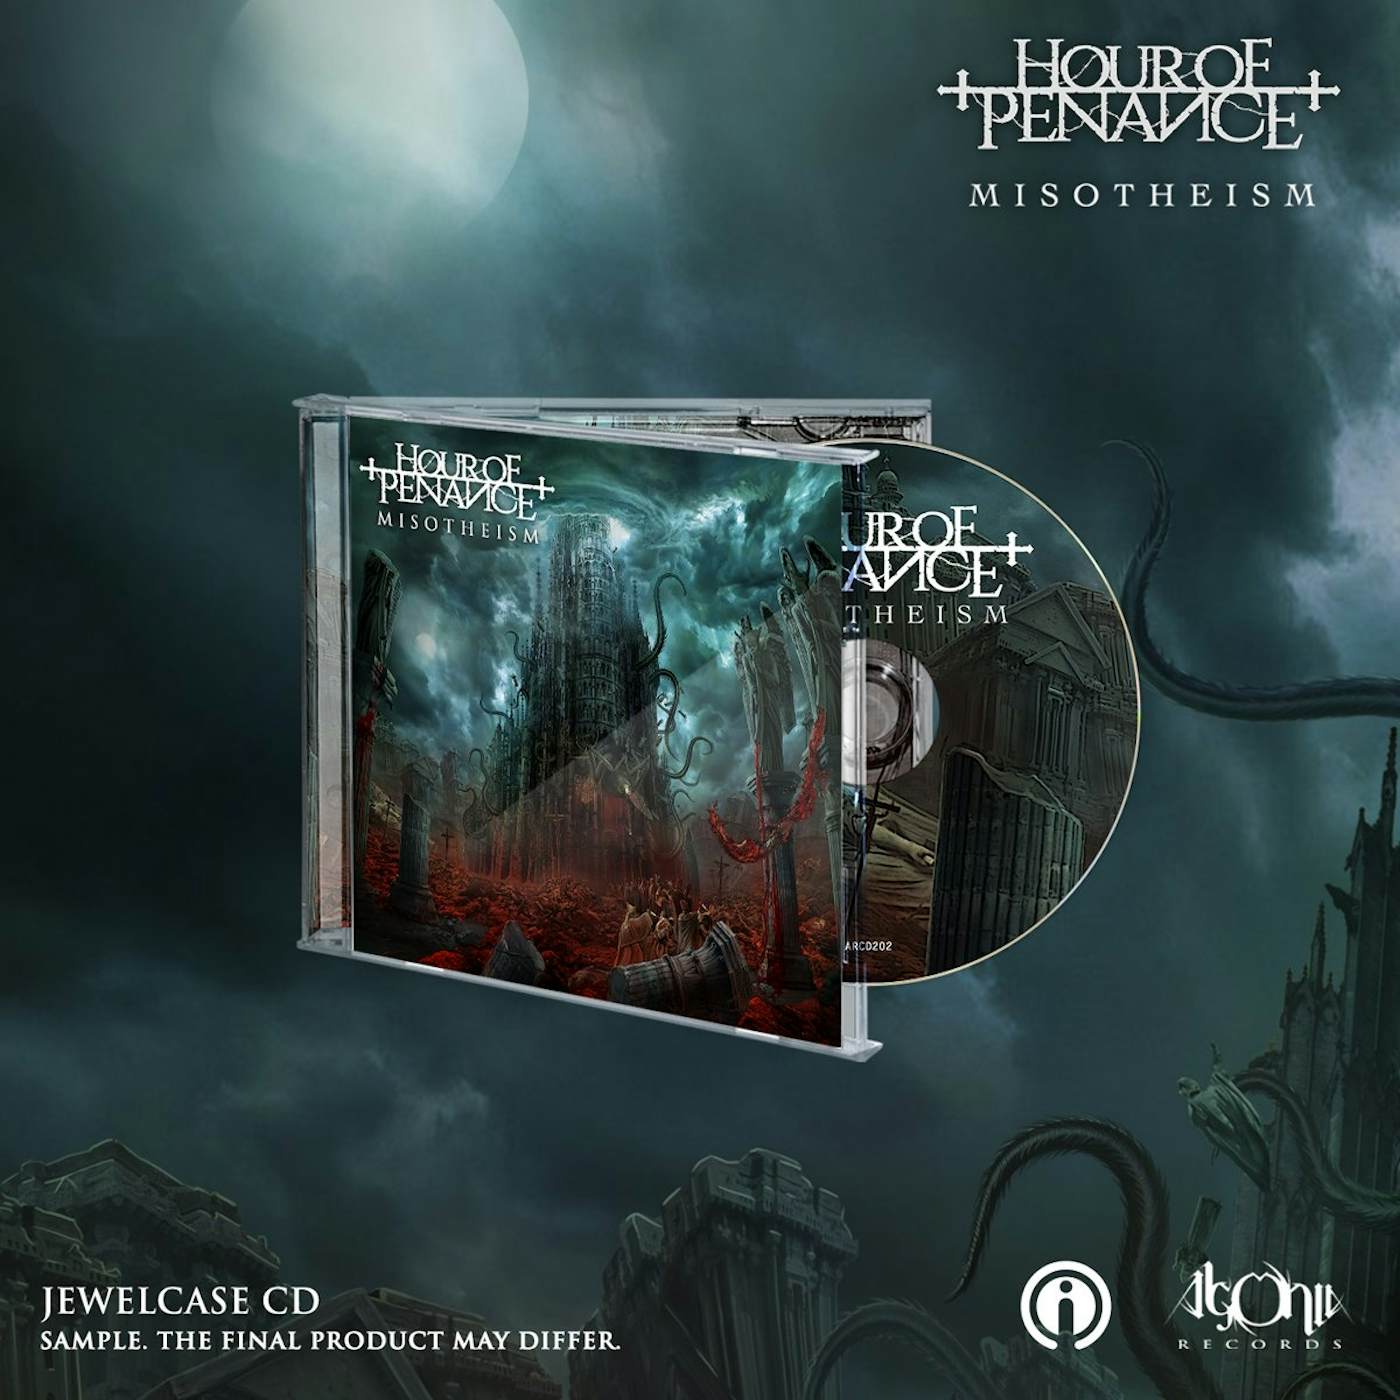 Hour Of Penance "Misotheism" Limited Edition CD